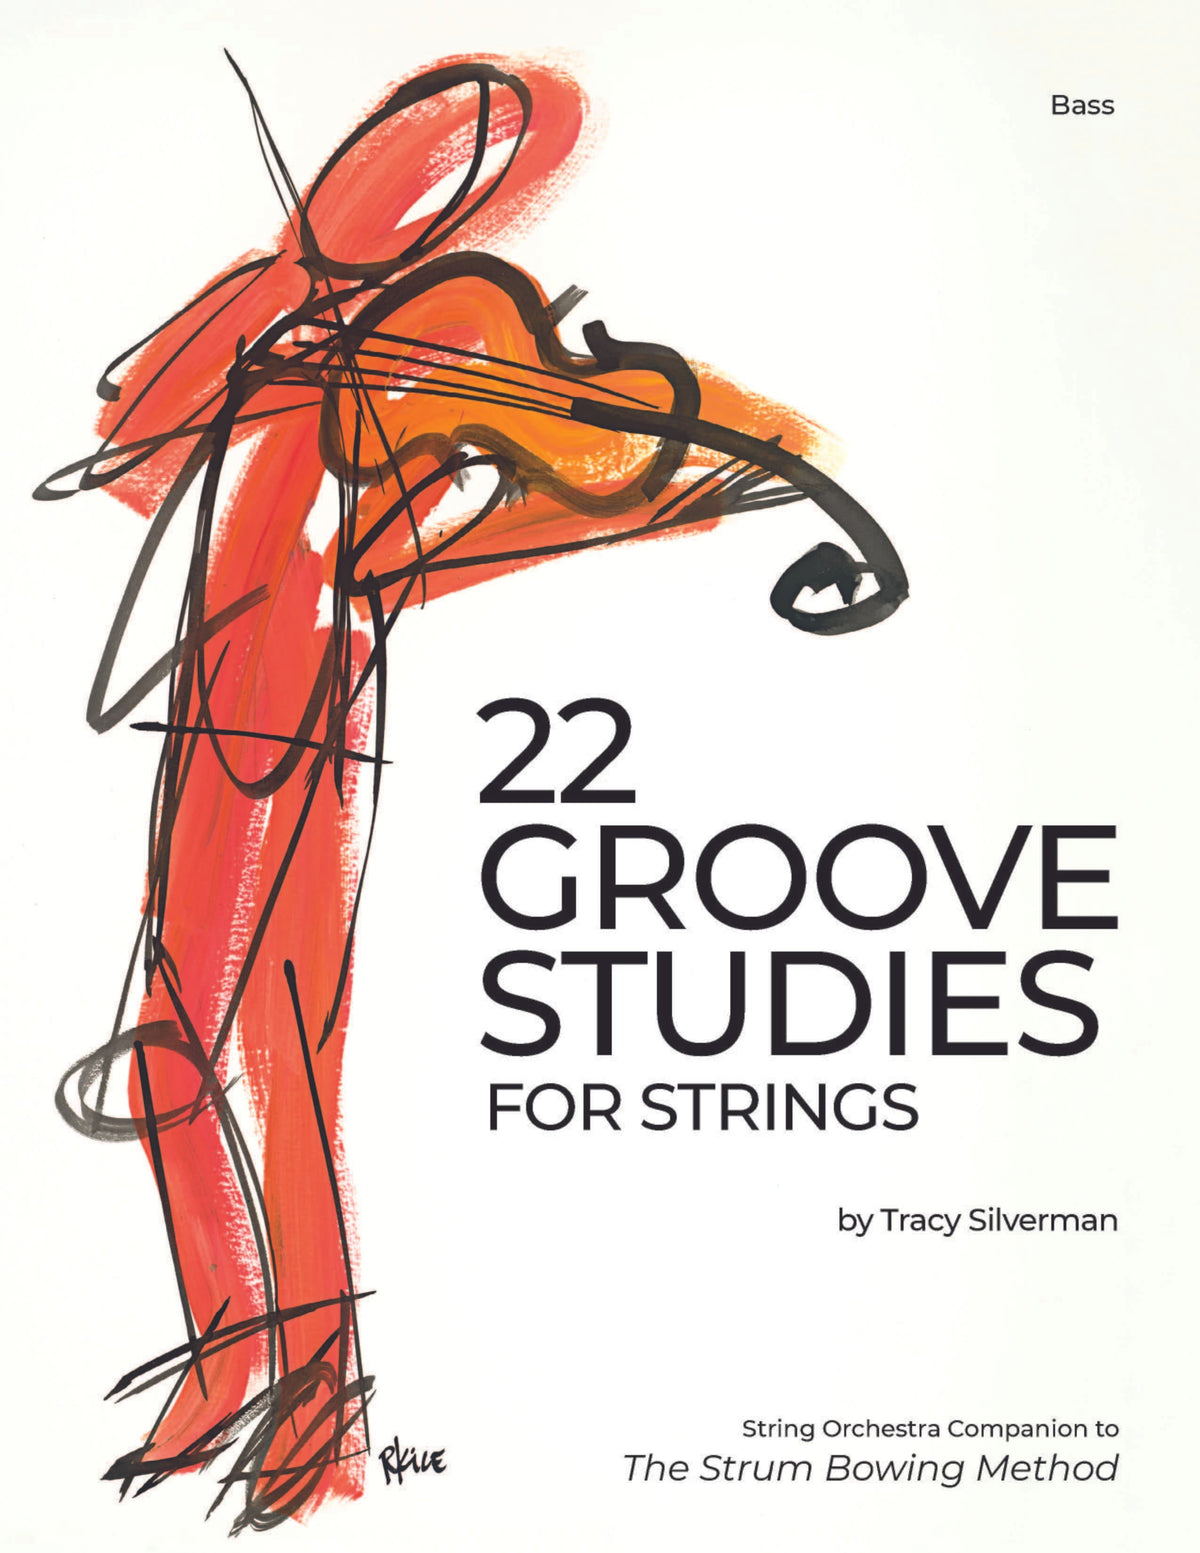 Silverman, Tracy - 22 Groove Studies for Strings - Bass Part - Digital Download